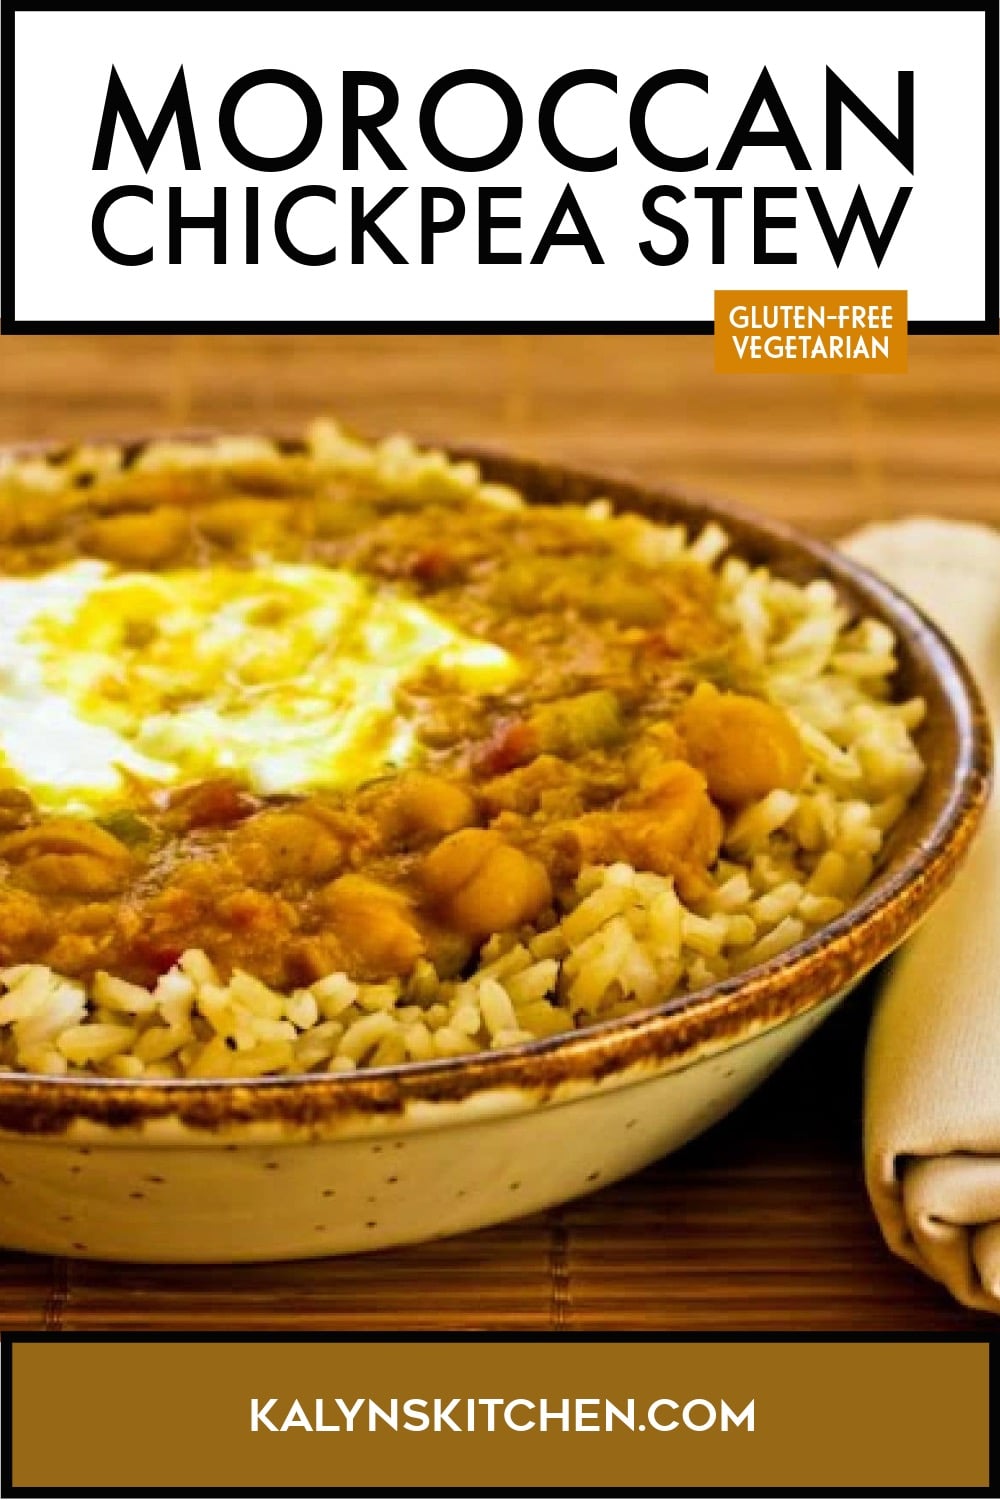 Pinterest image of Moroccan Chickpea Stew